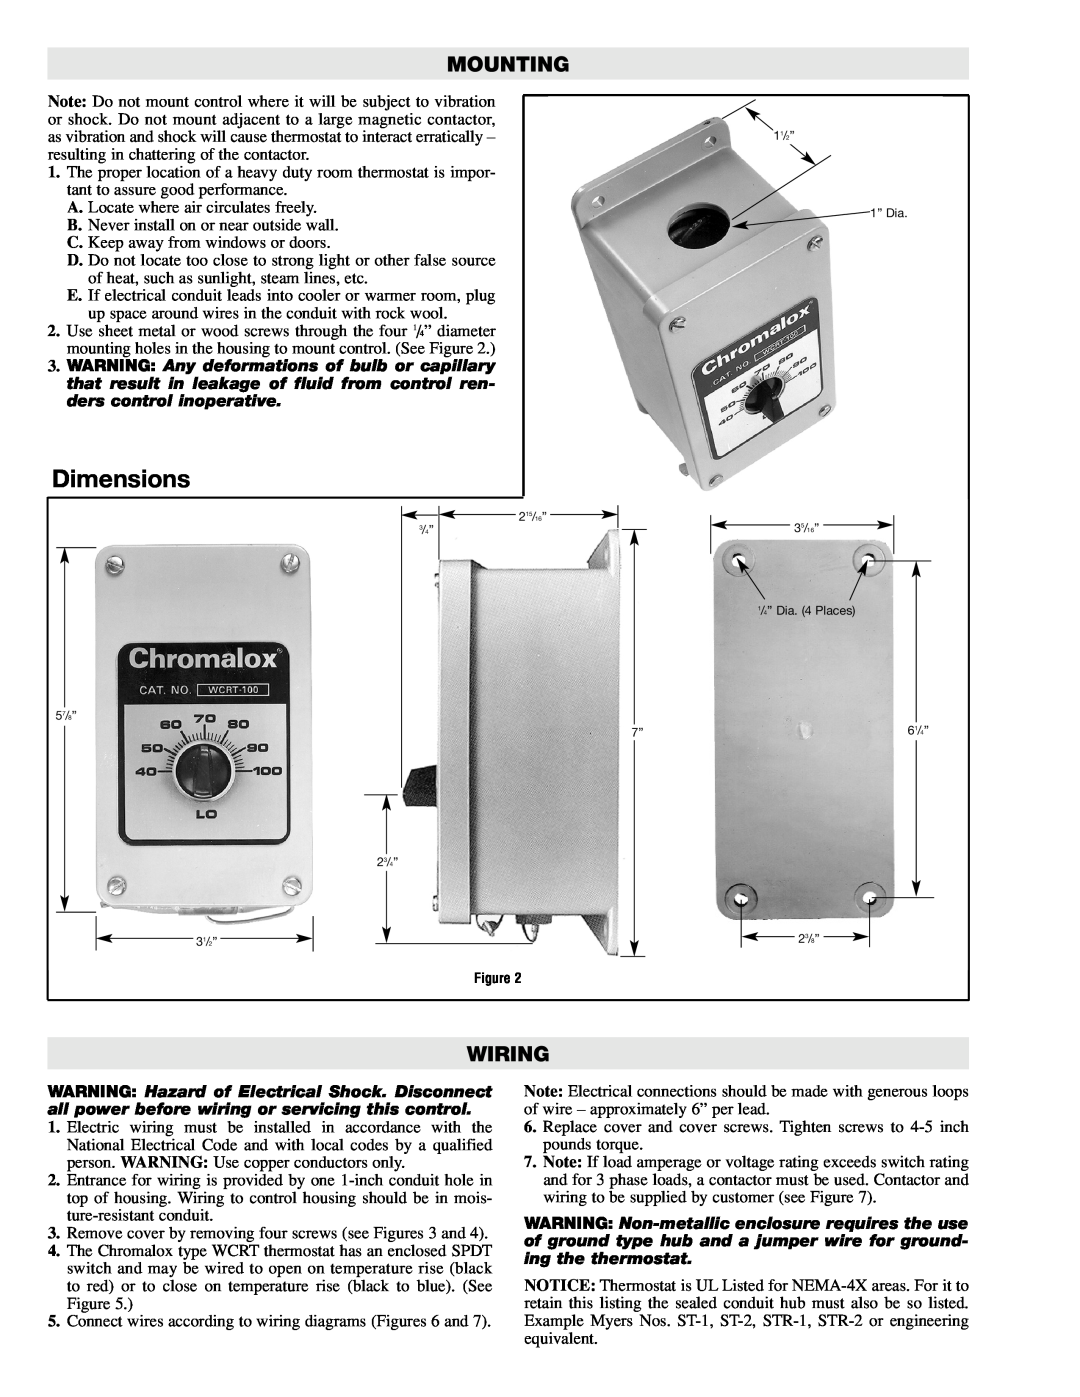 Chromalox PK471-4 specifications Mounting, Wiring, Dimensions 